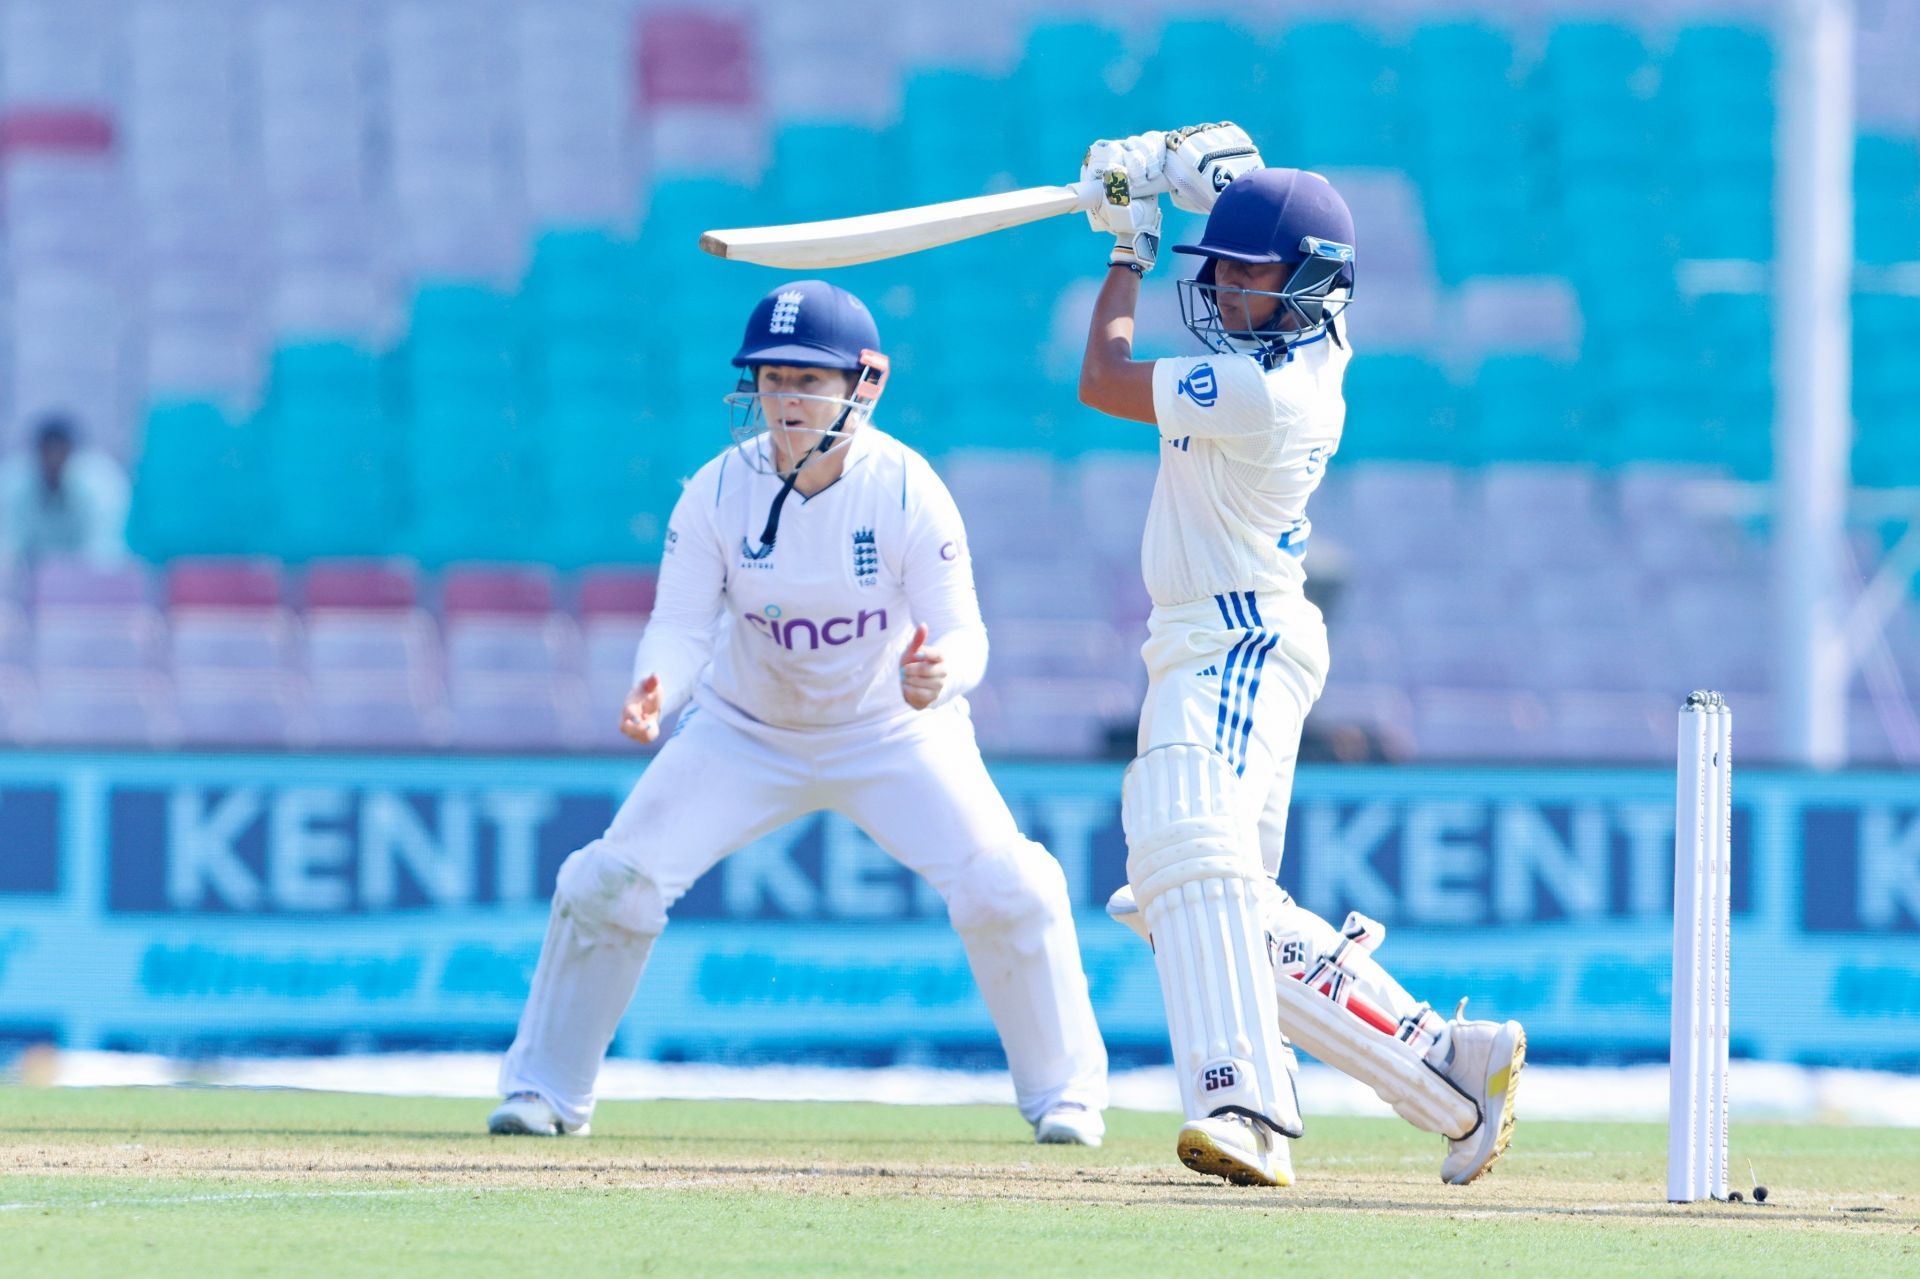 Shubha Satheesh made her international debut in the only Test between India and England last year. [P/C: BCCI Women/X]